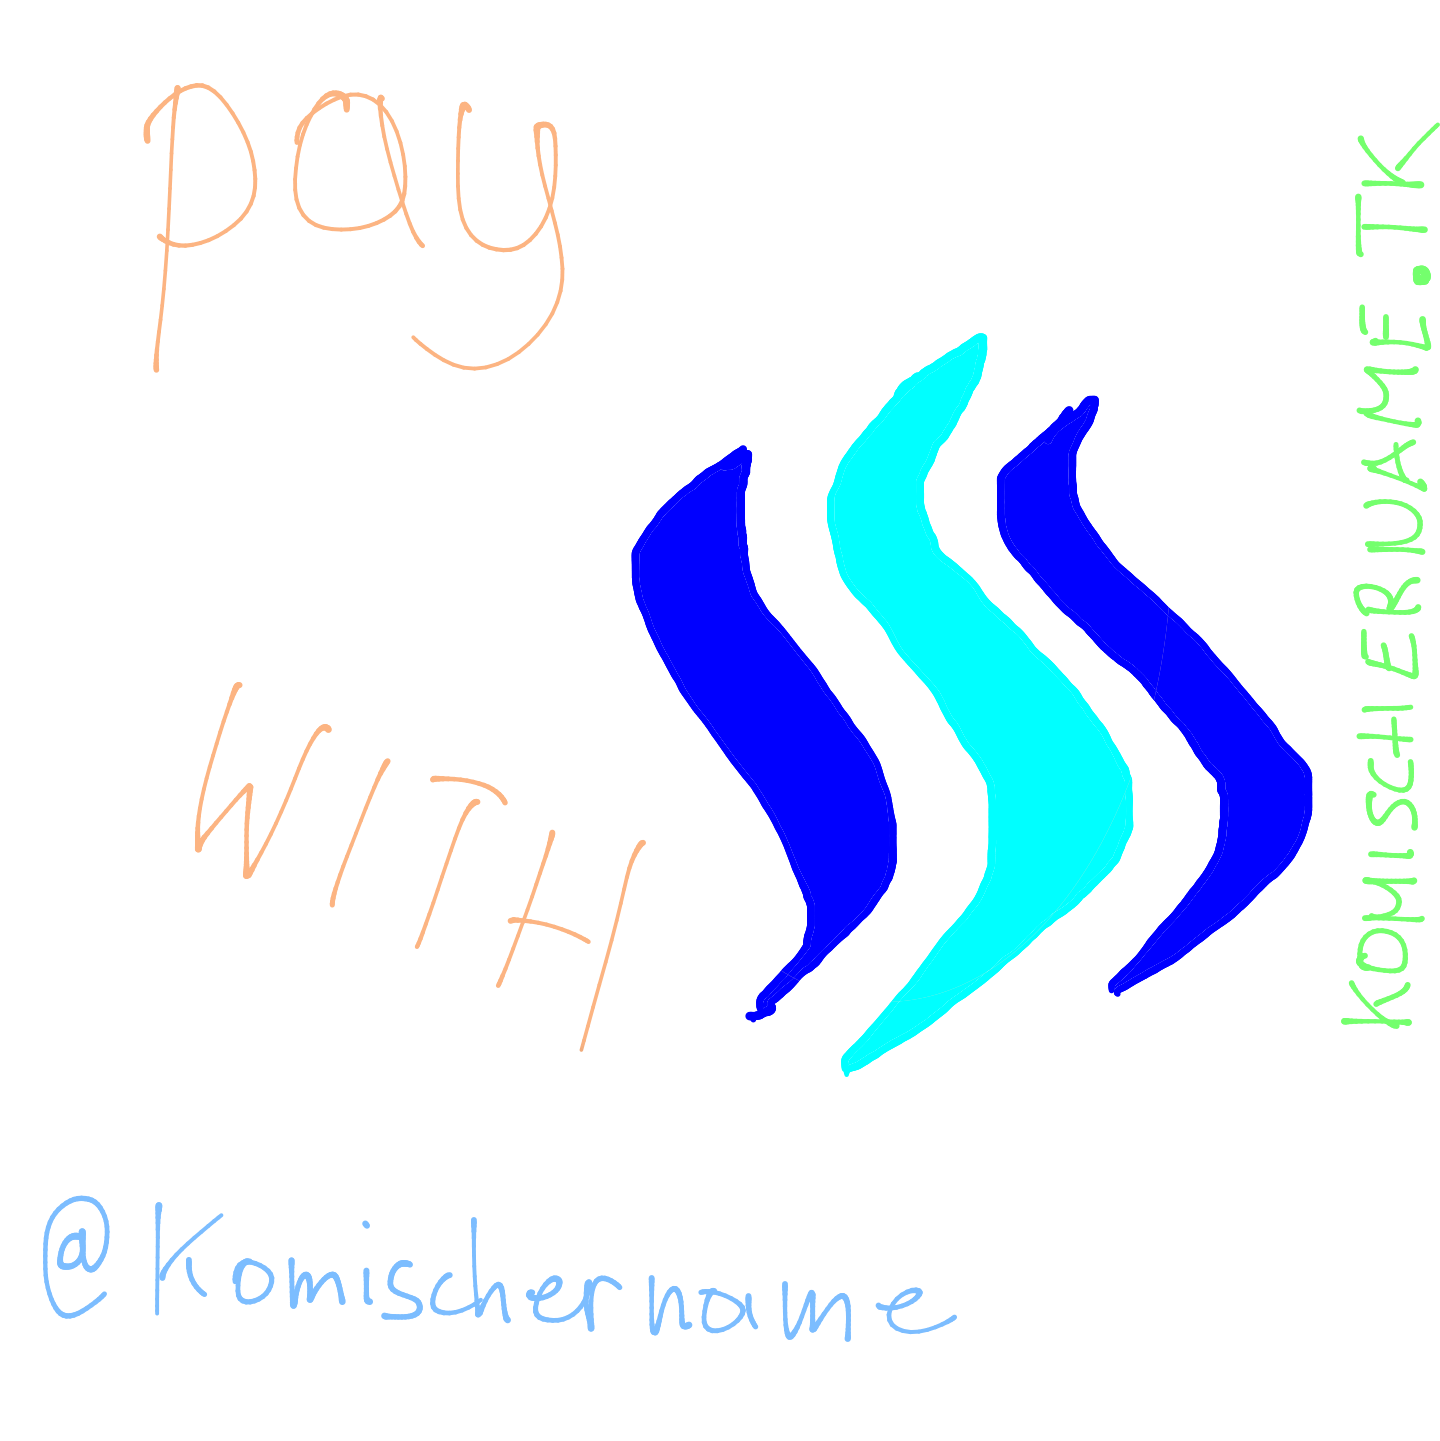 paywithsteem.png